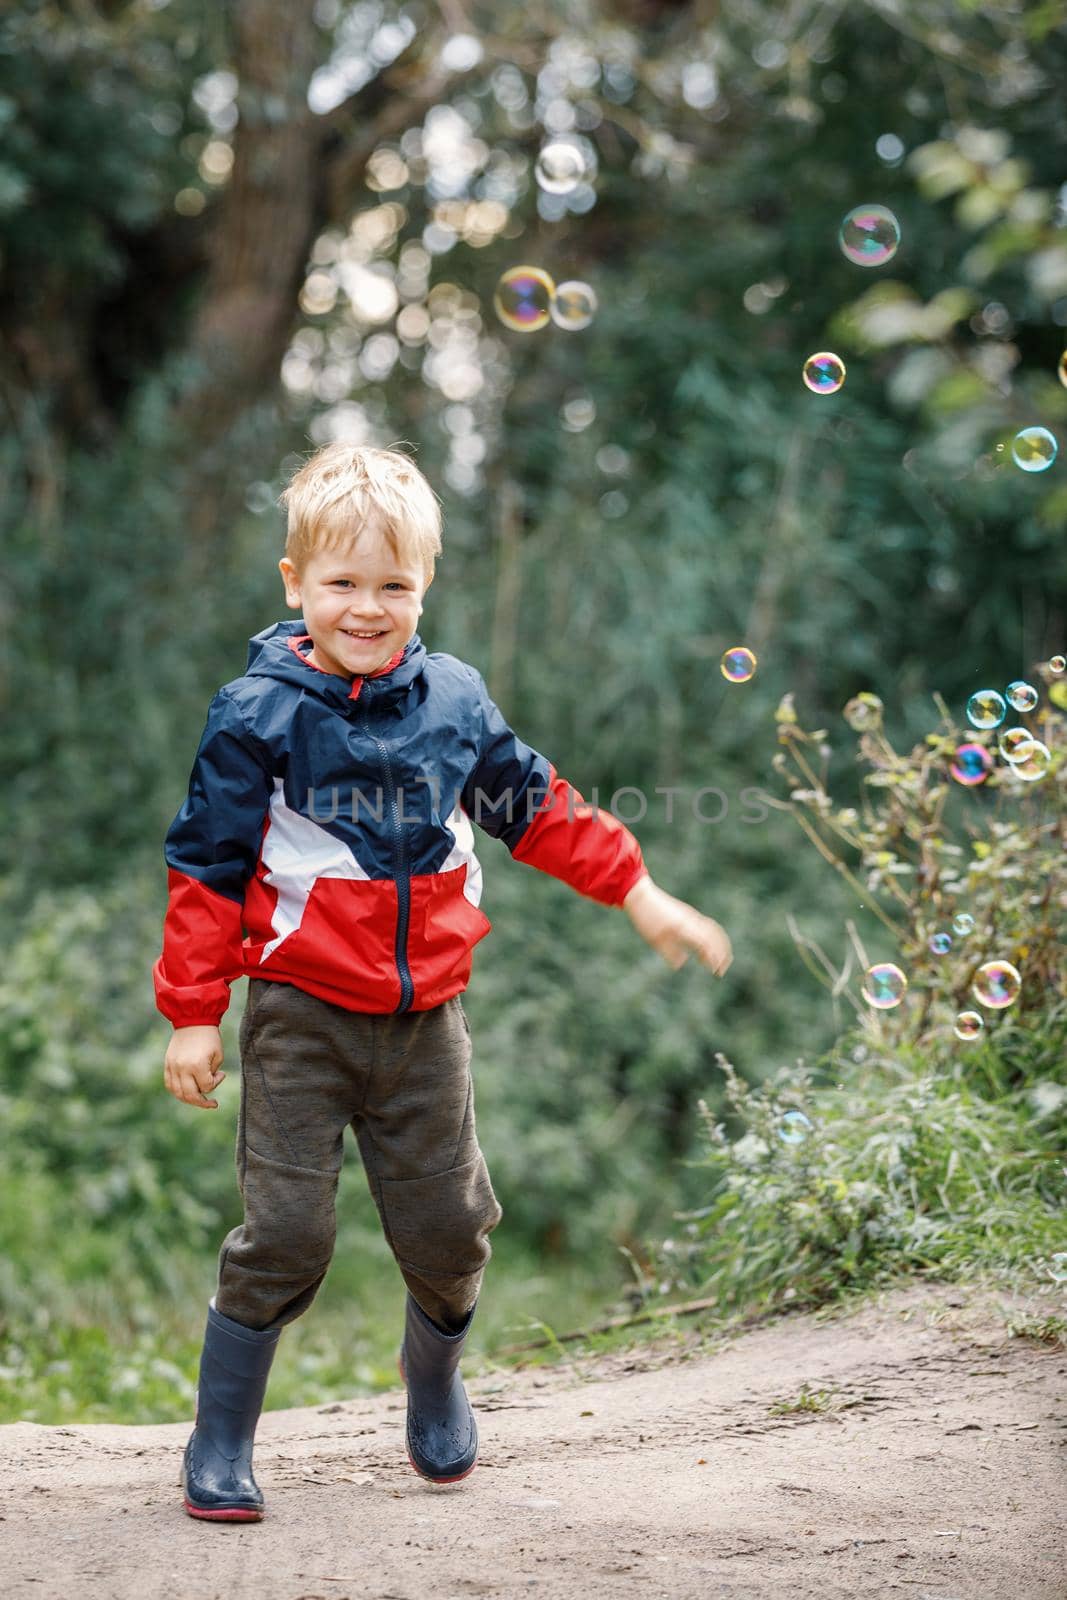 Little smiling boy having fun with bubbles in the nature. Summertime concept.